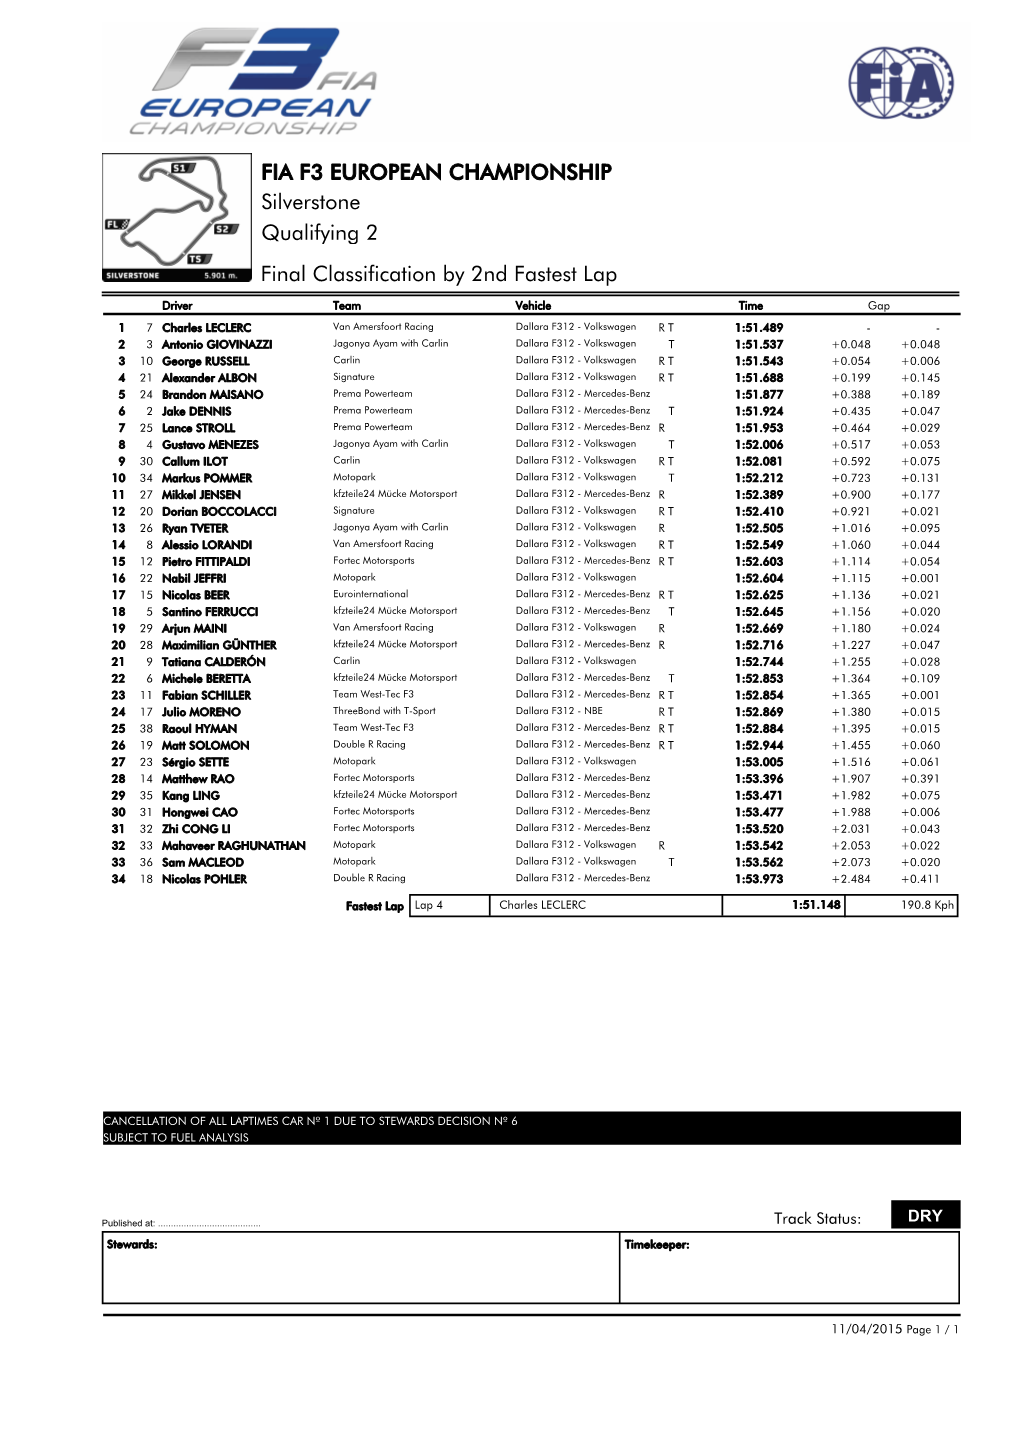 Final Classification by 2Nd Fastest Lap Qualifying 2 Silverstone FIA F3